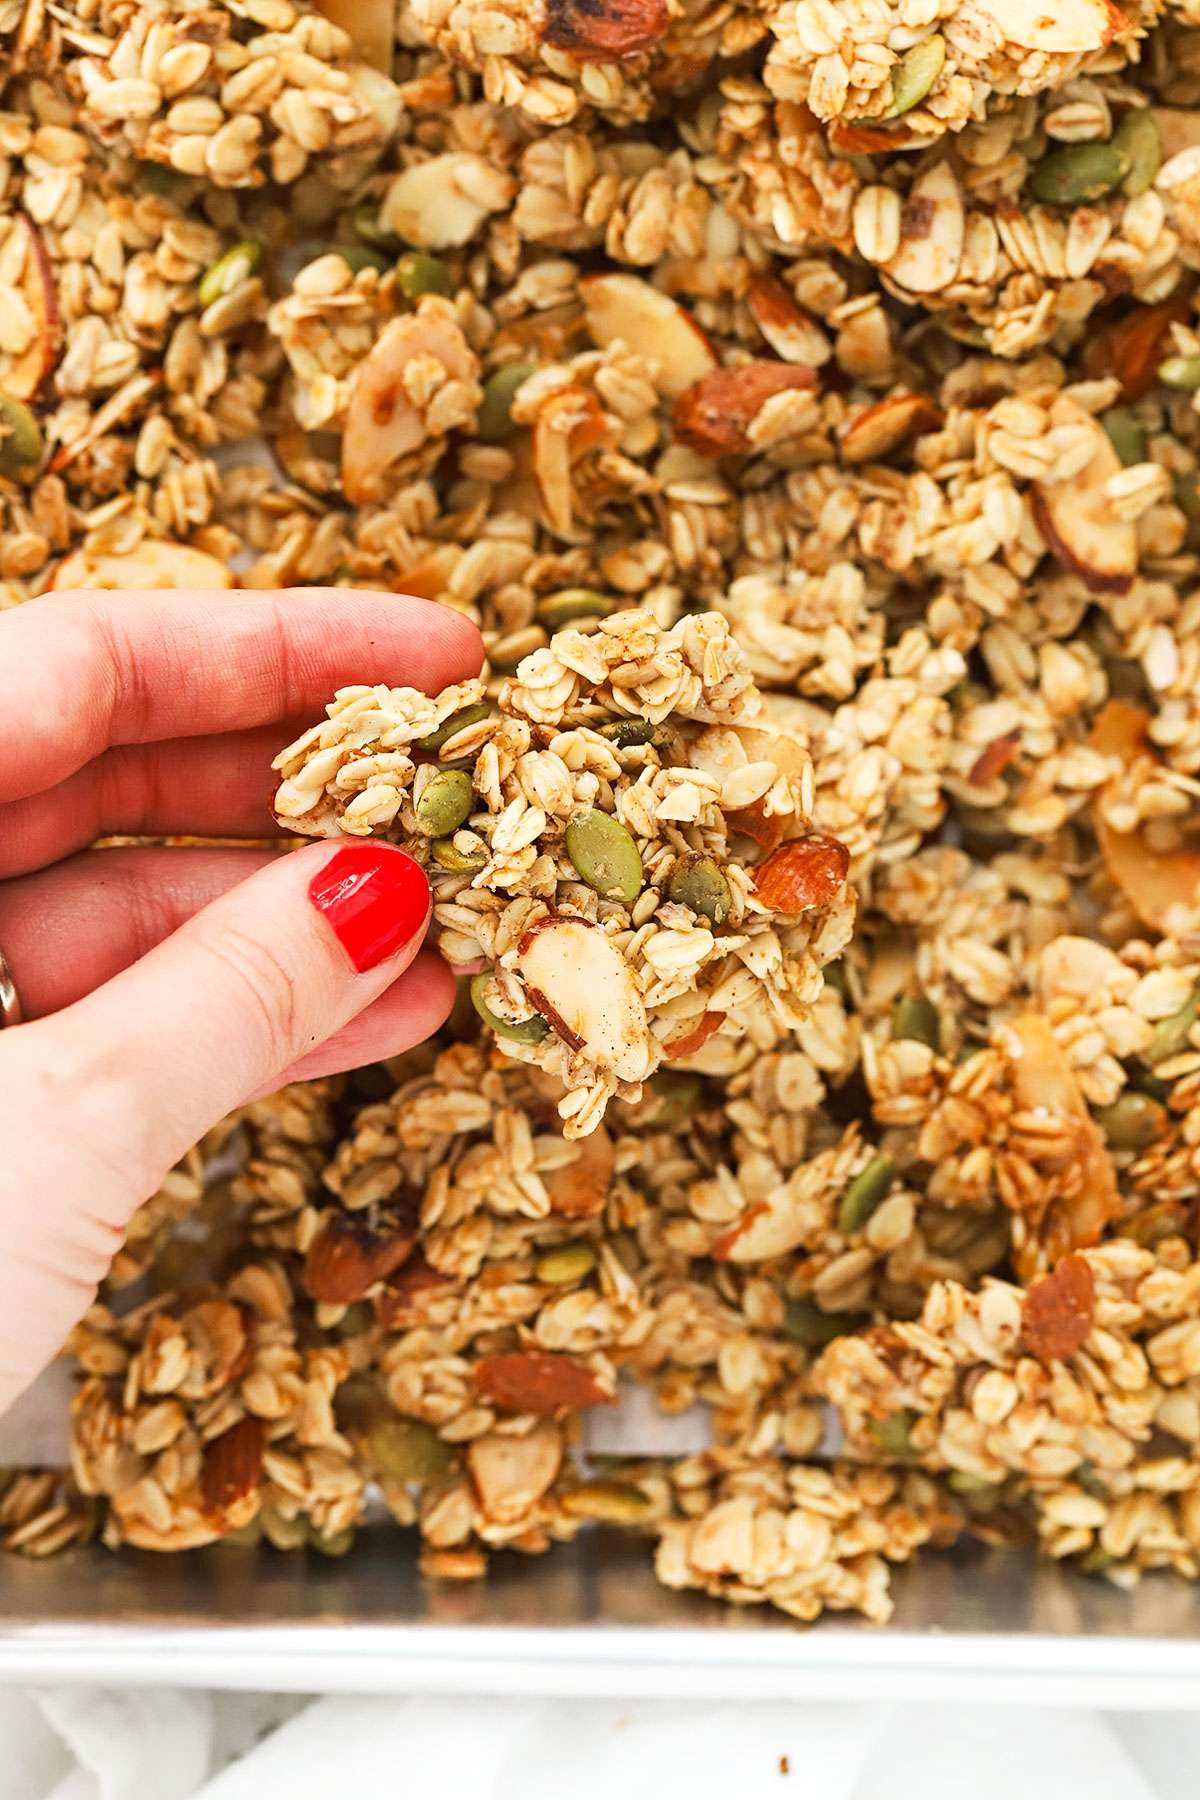 holding up a large gluten-free granola cluster